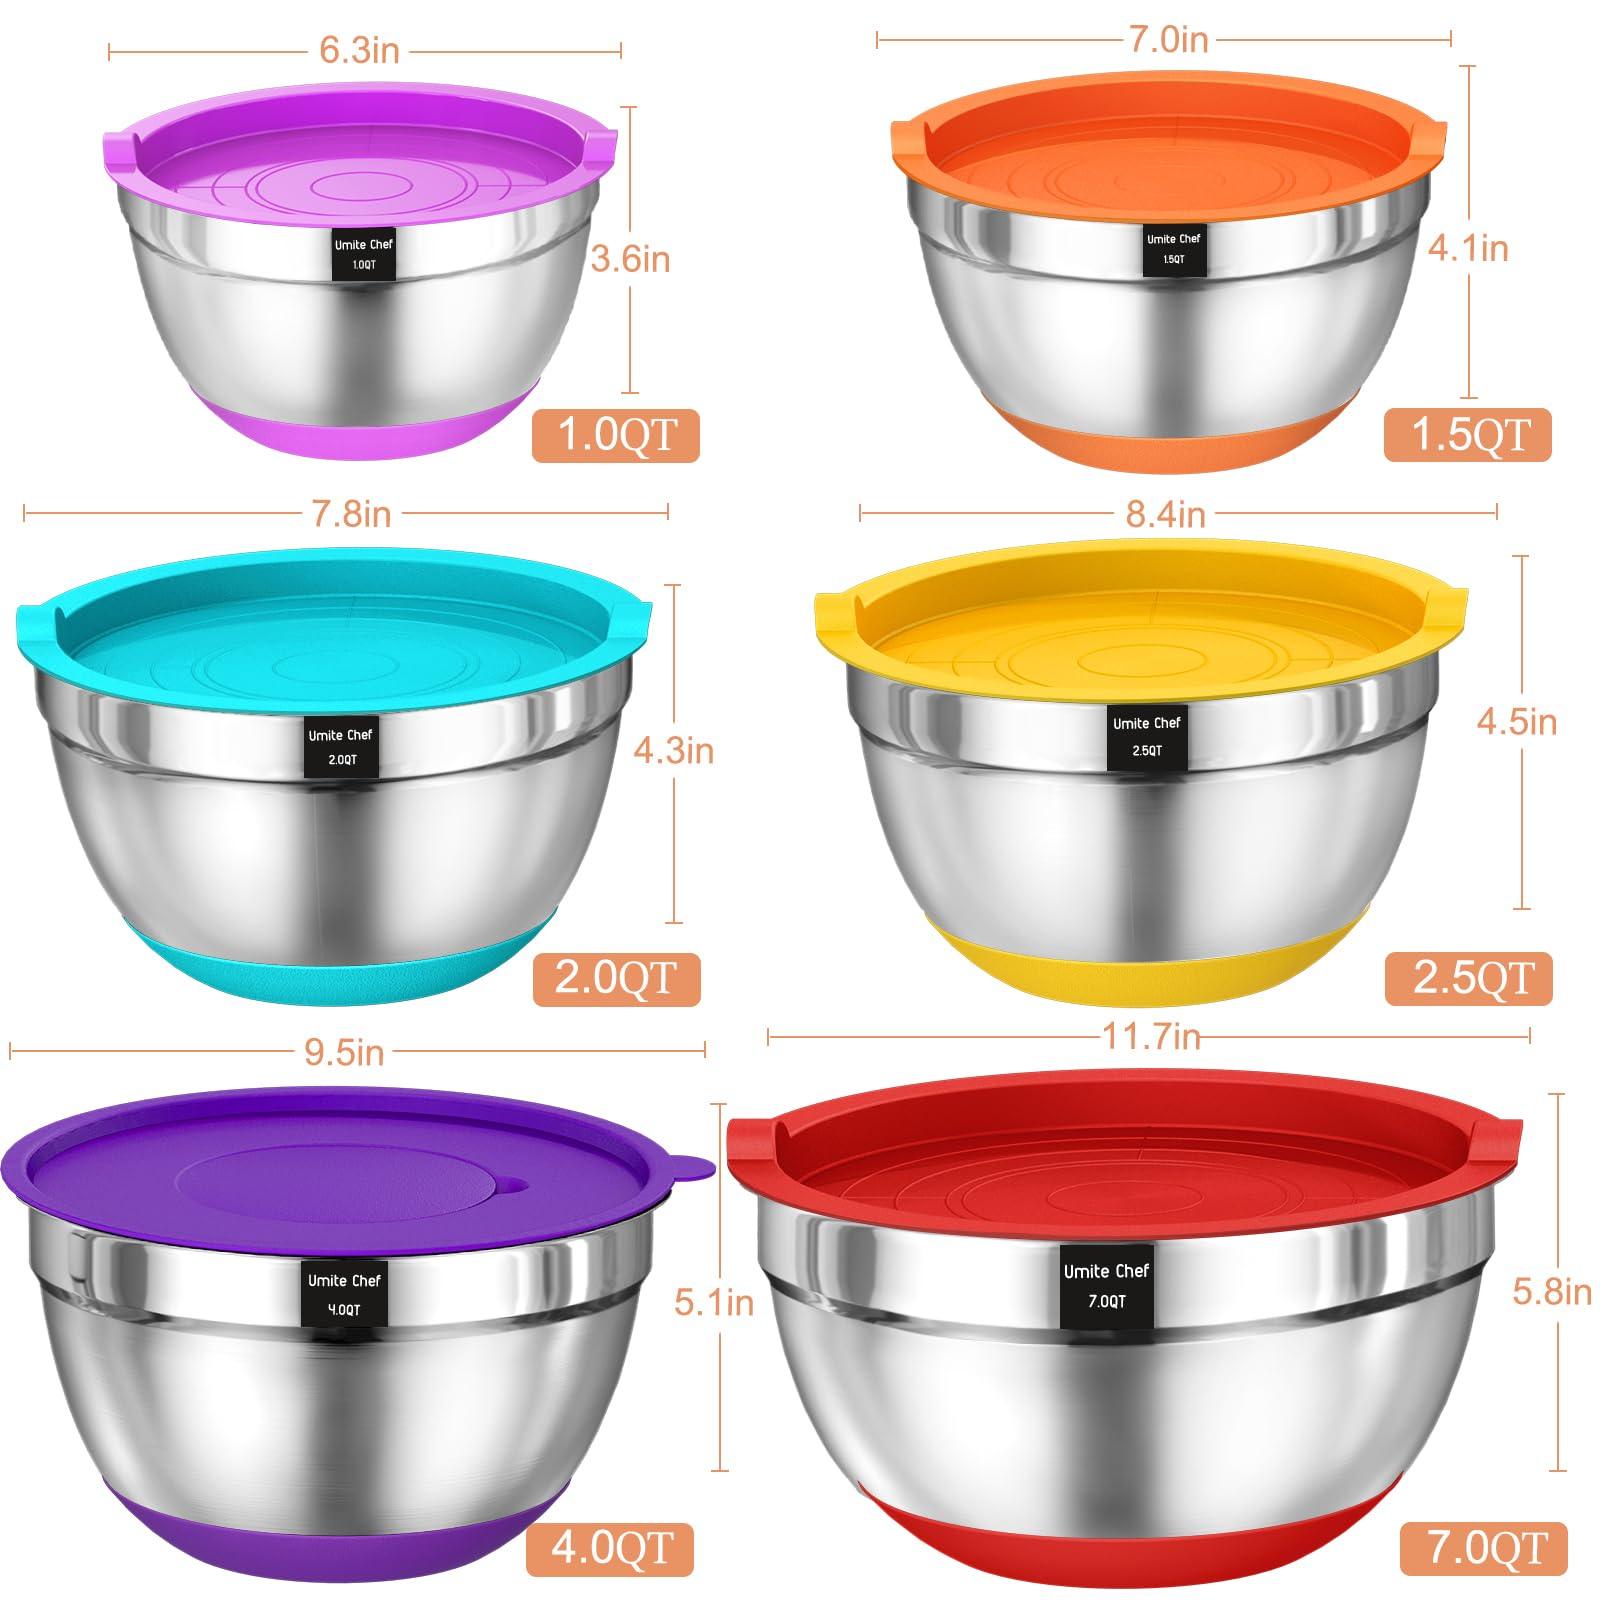 Umite Chef Mixing Bowls with Airtight Lids, 26Pcs Stainless Steel Bowls Set, 3 Grater Attachments & Colorful Non-Slip Bottoms Size 7, 4, 2.5, 2.0,1.5, 1QT, Great for Mixing & Serving - CookCave